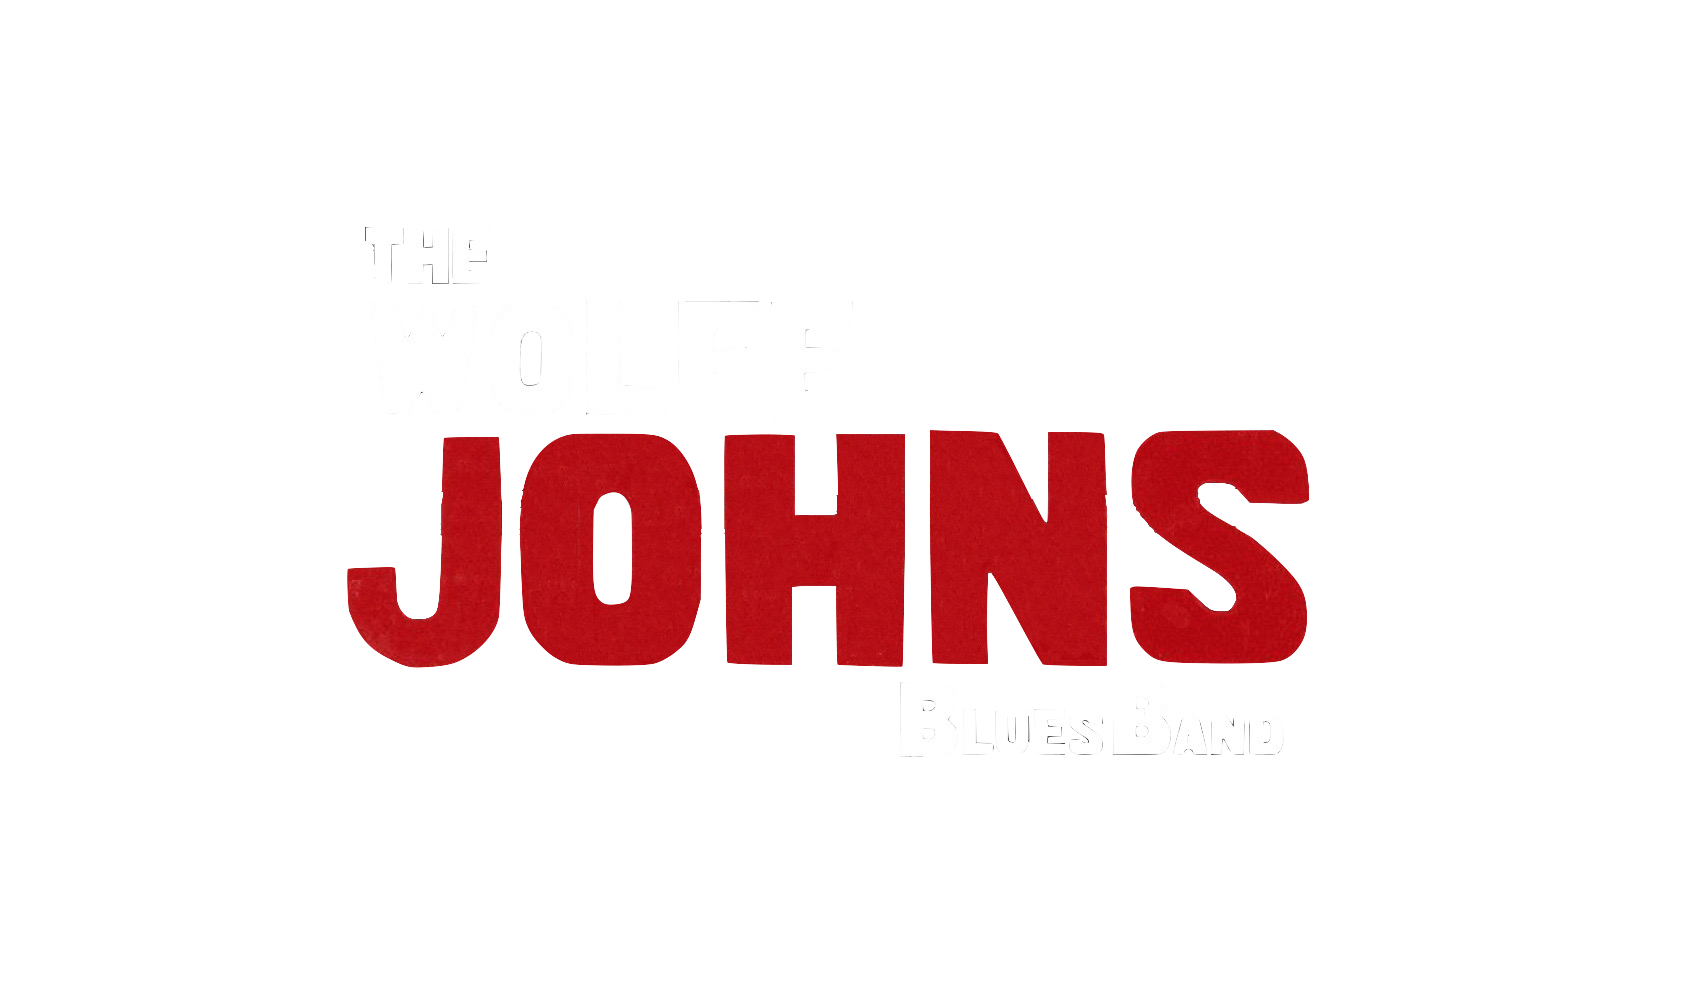 The Wolfe Johns Blues Band